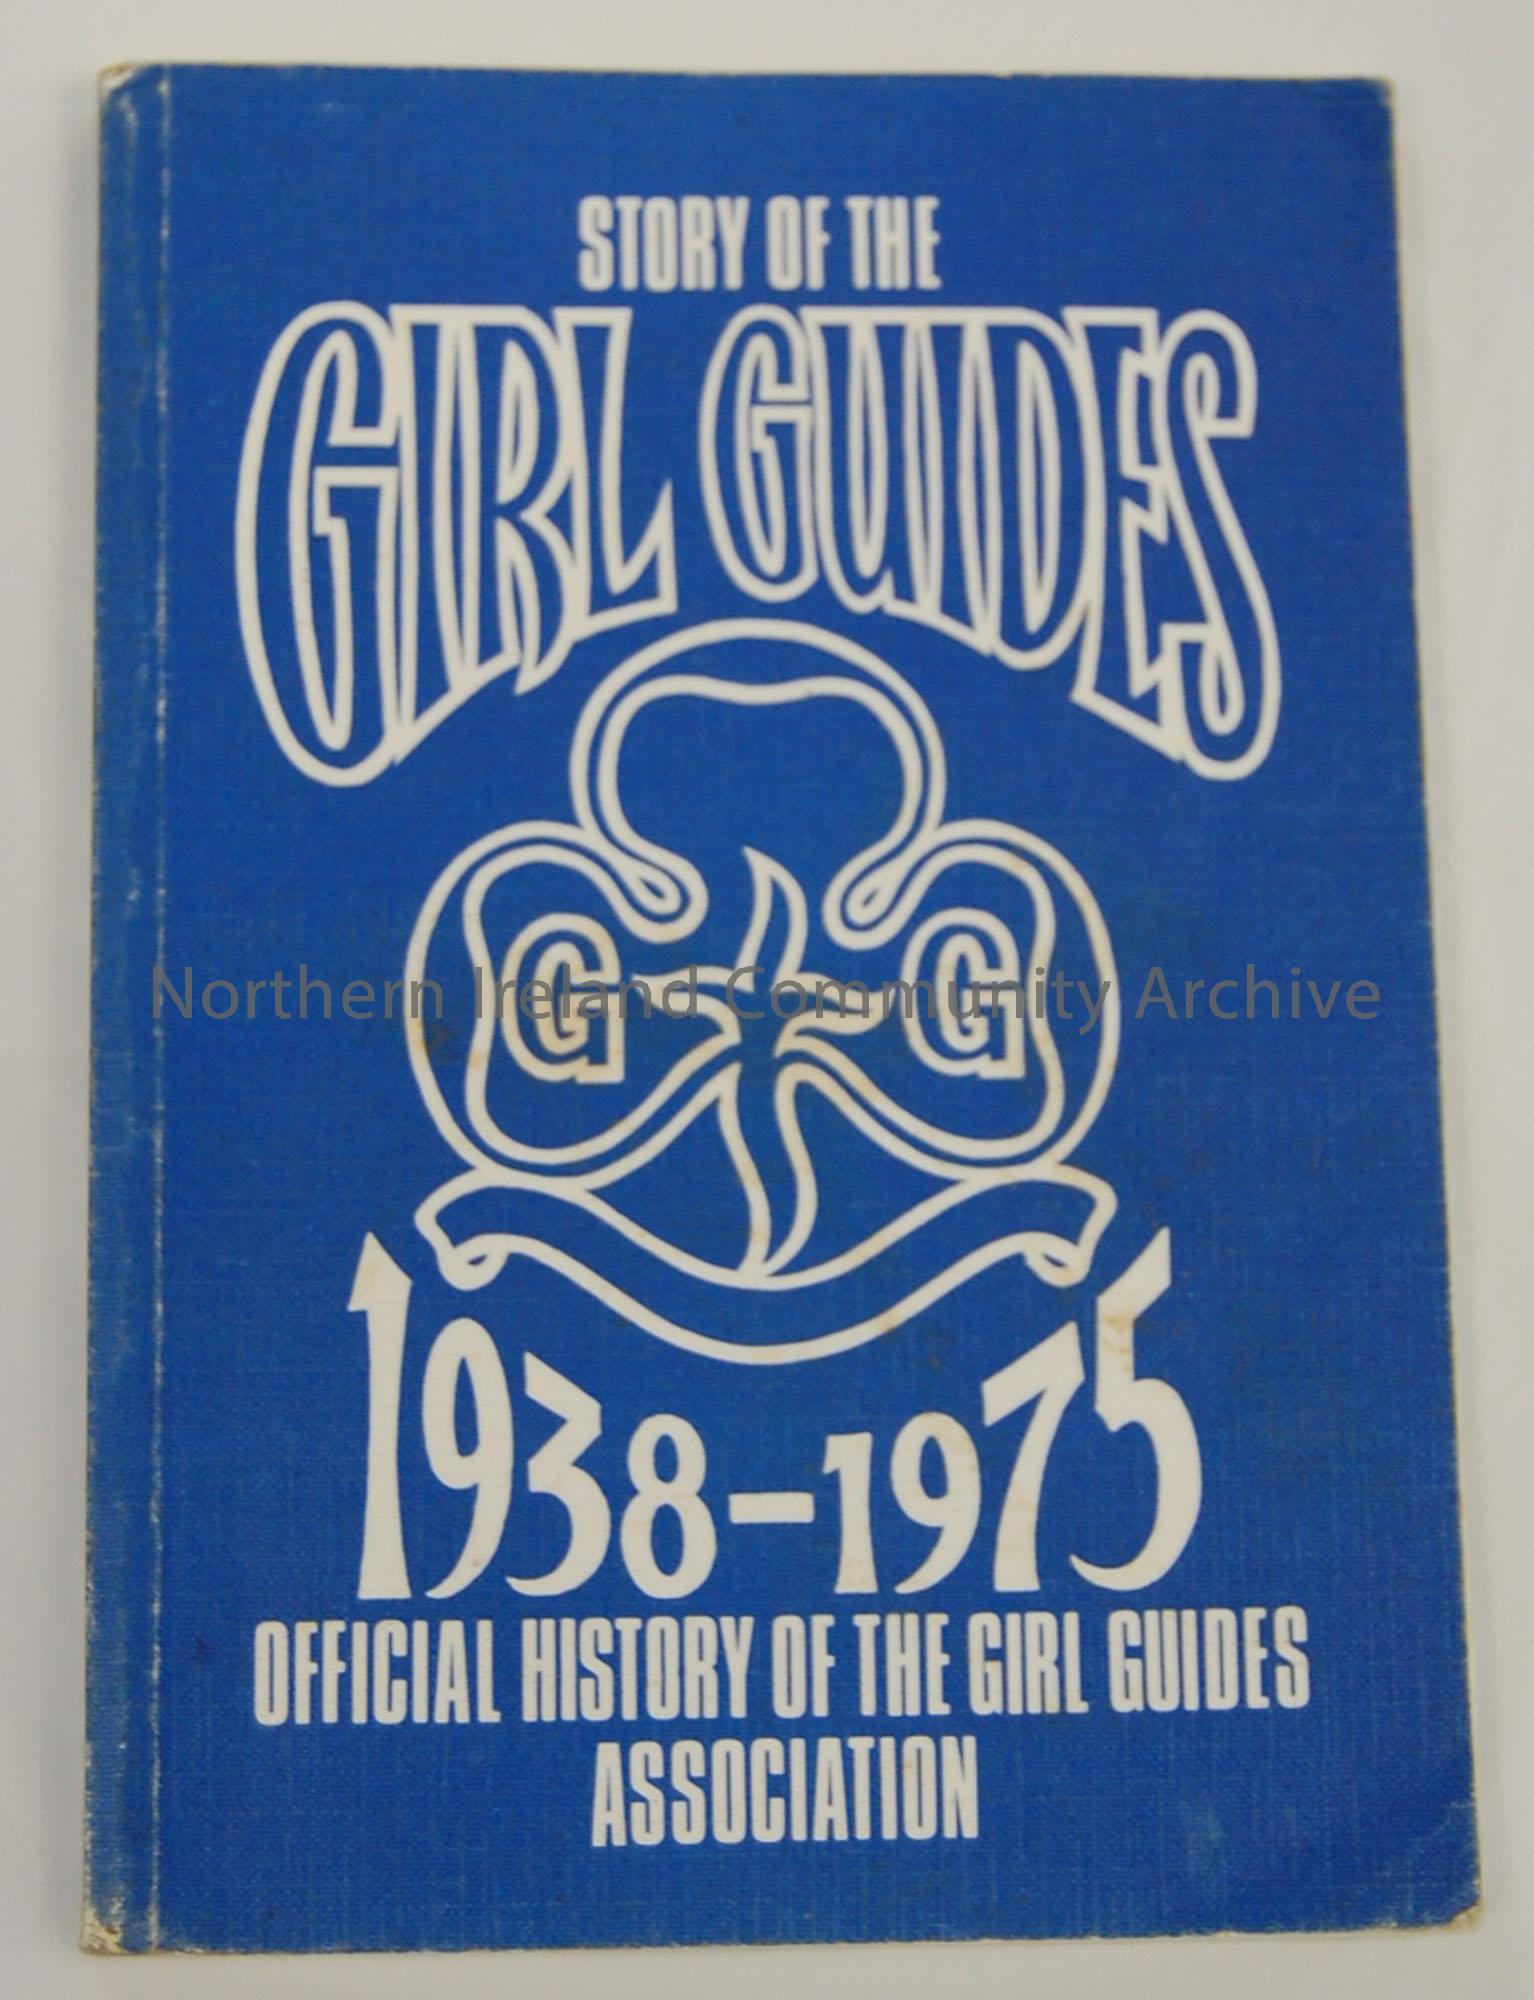 Girl Guide Association. Story of the Girl Guides. Official history of the Girl Guides association. 1938-1975. Price £1.25